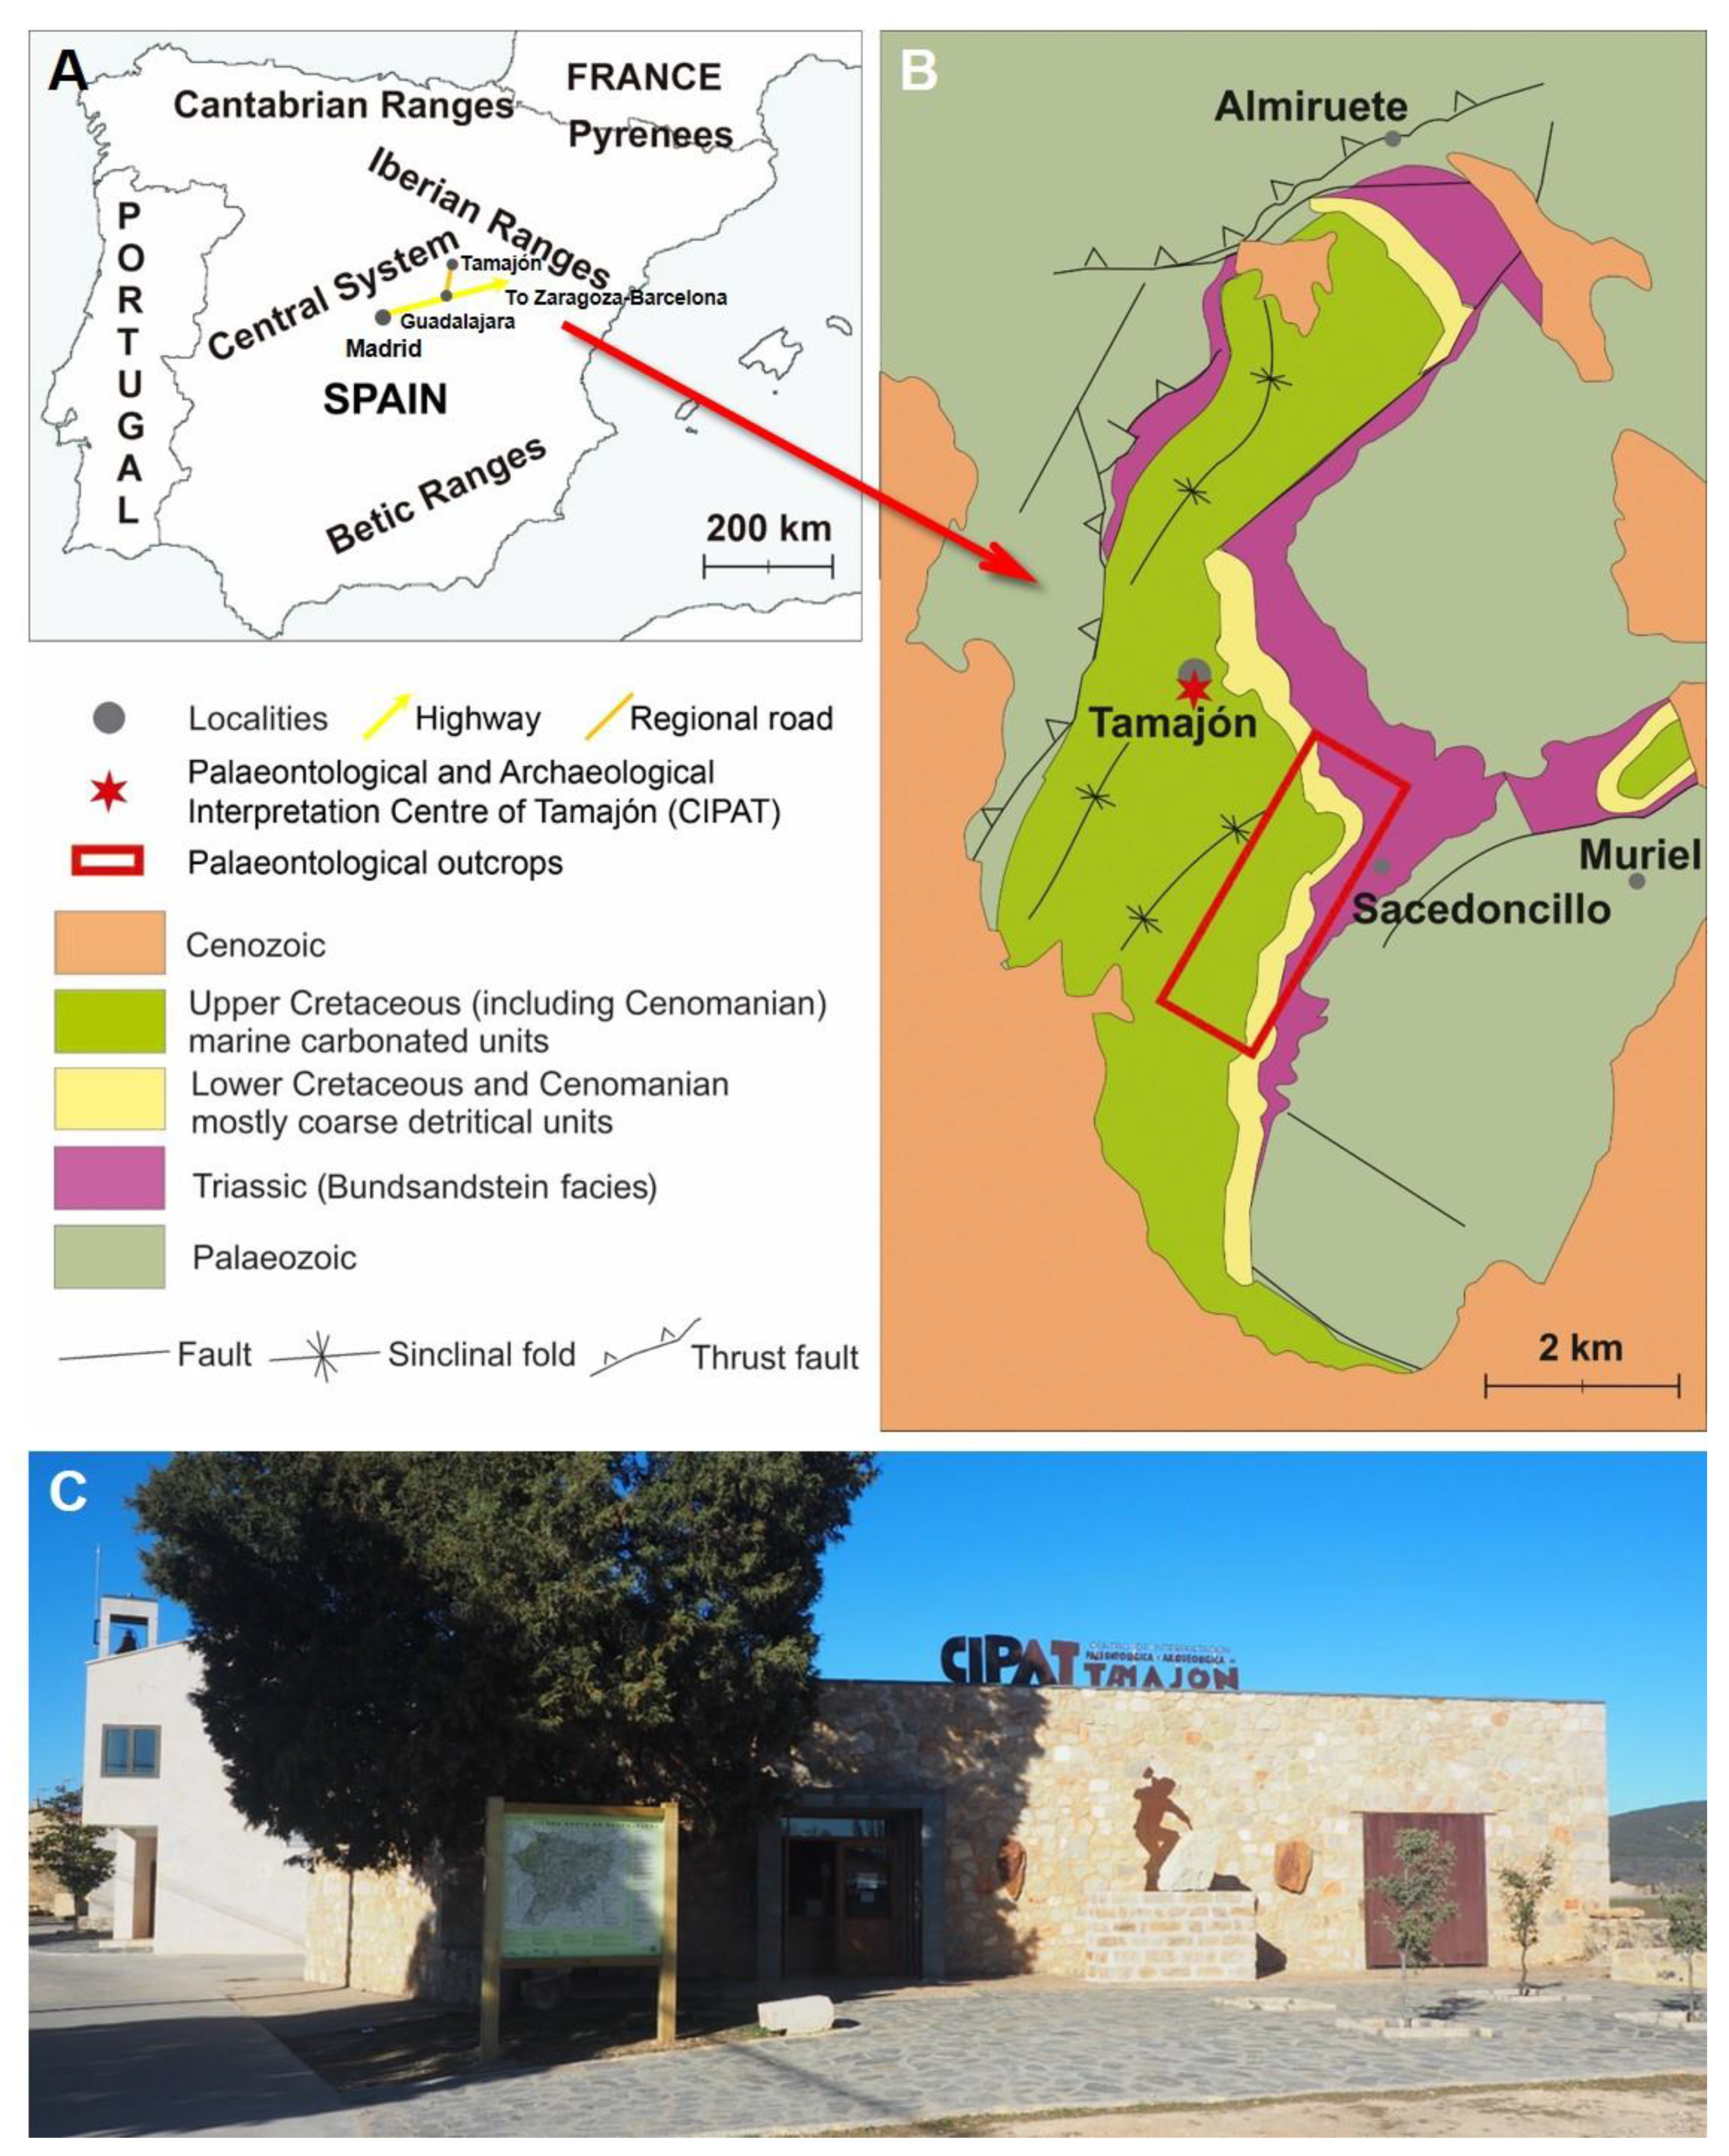 Land | Free Full-Text | Discovering a Project for the Development of  Geotourism in Rural Areas: The Paleontological and Archaeological  Interpretation Centre of Tamaj&oacute;n (CIPAT, Guadalajara, Spain)